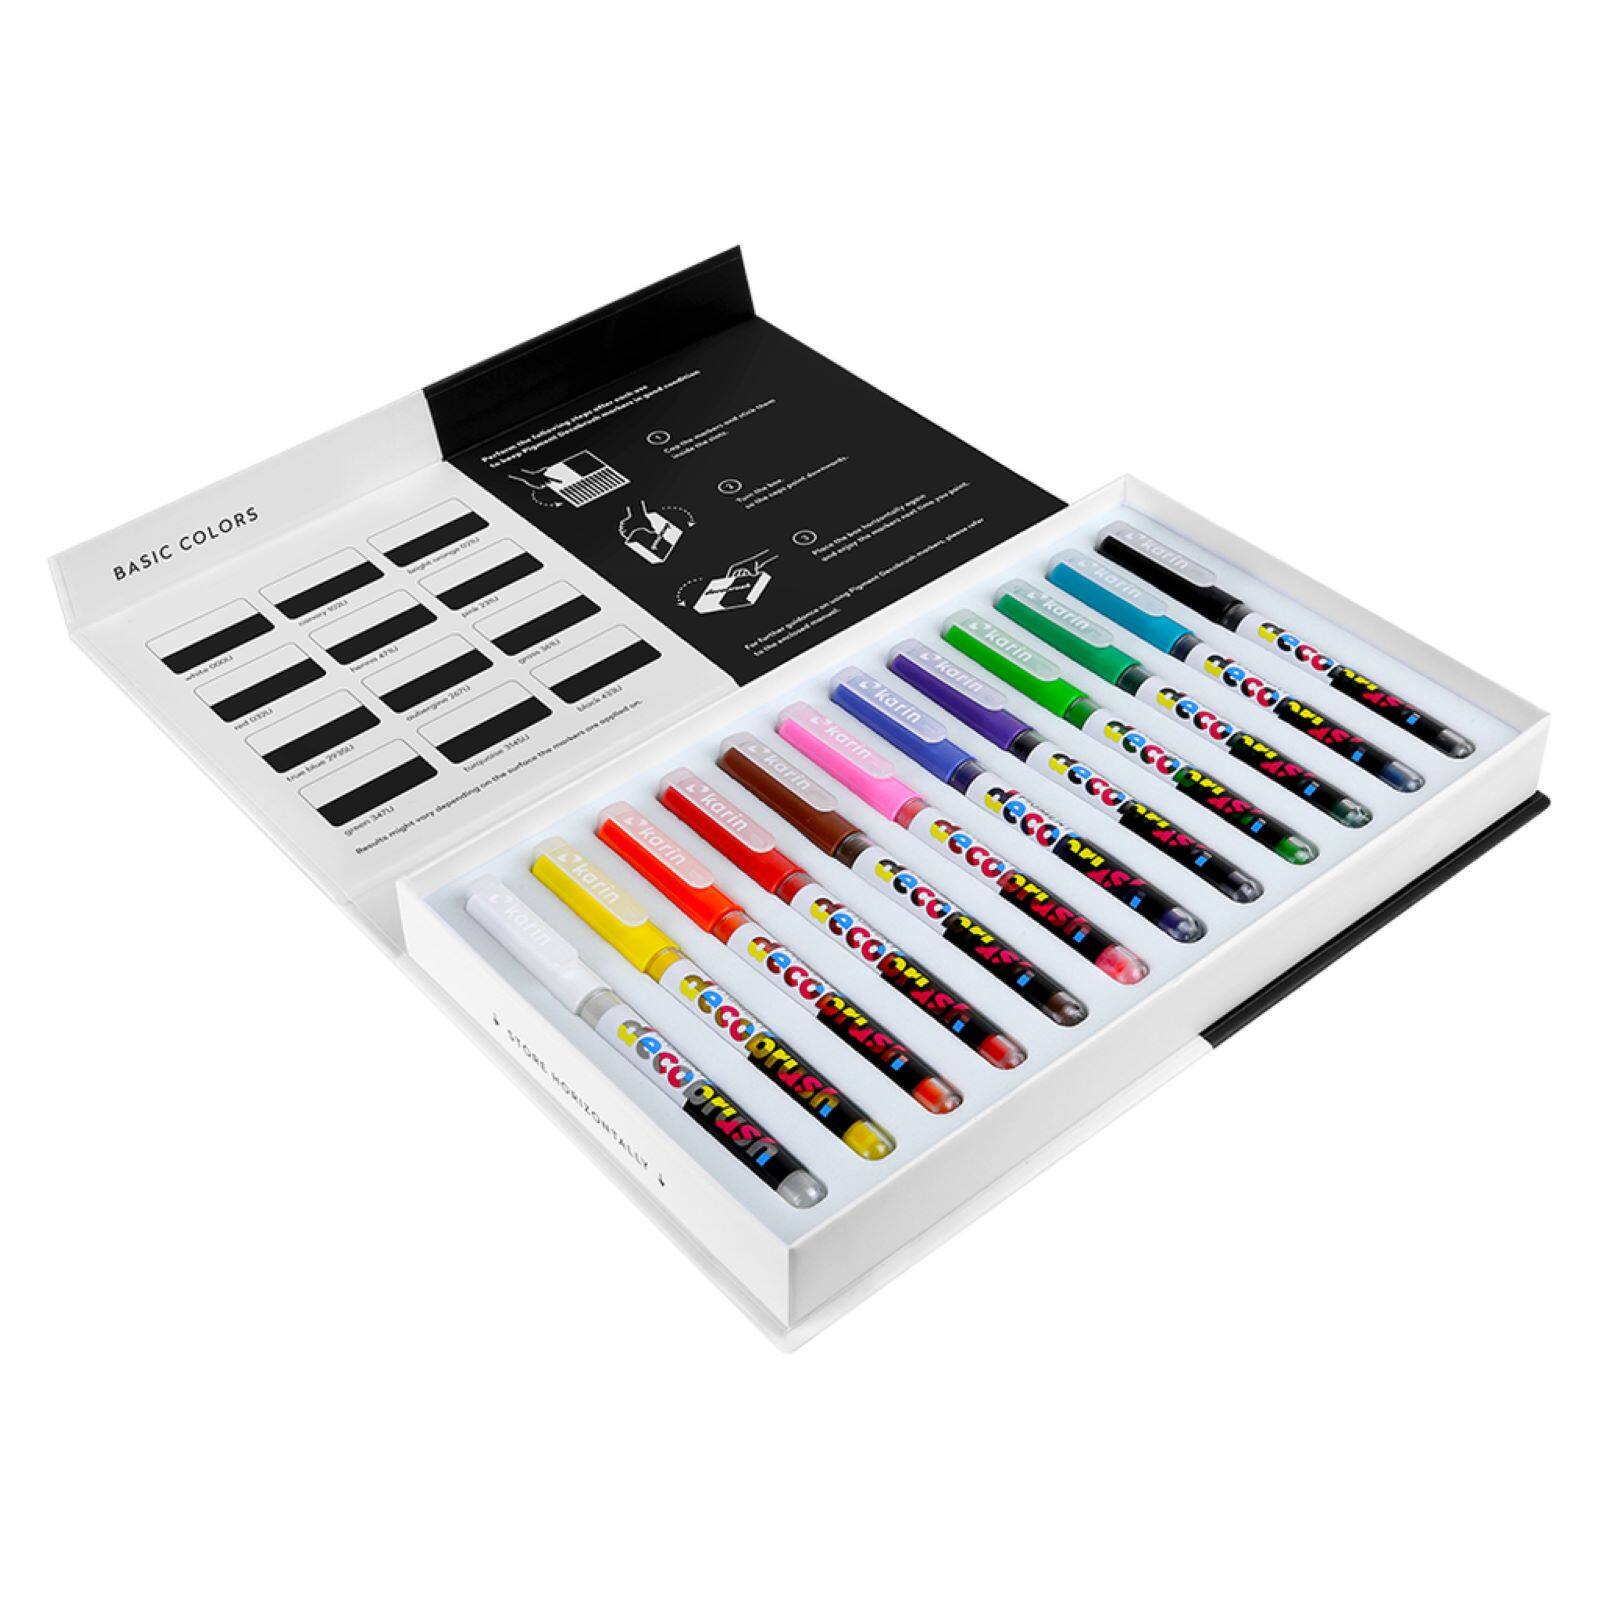 Karin Brushmarkers Pro Markers and Sets - Set of 12, Basic Colors